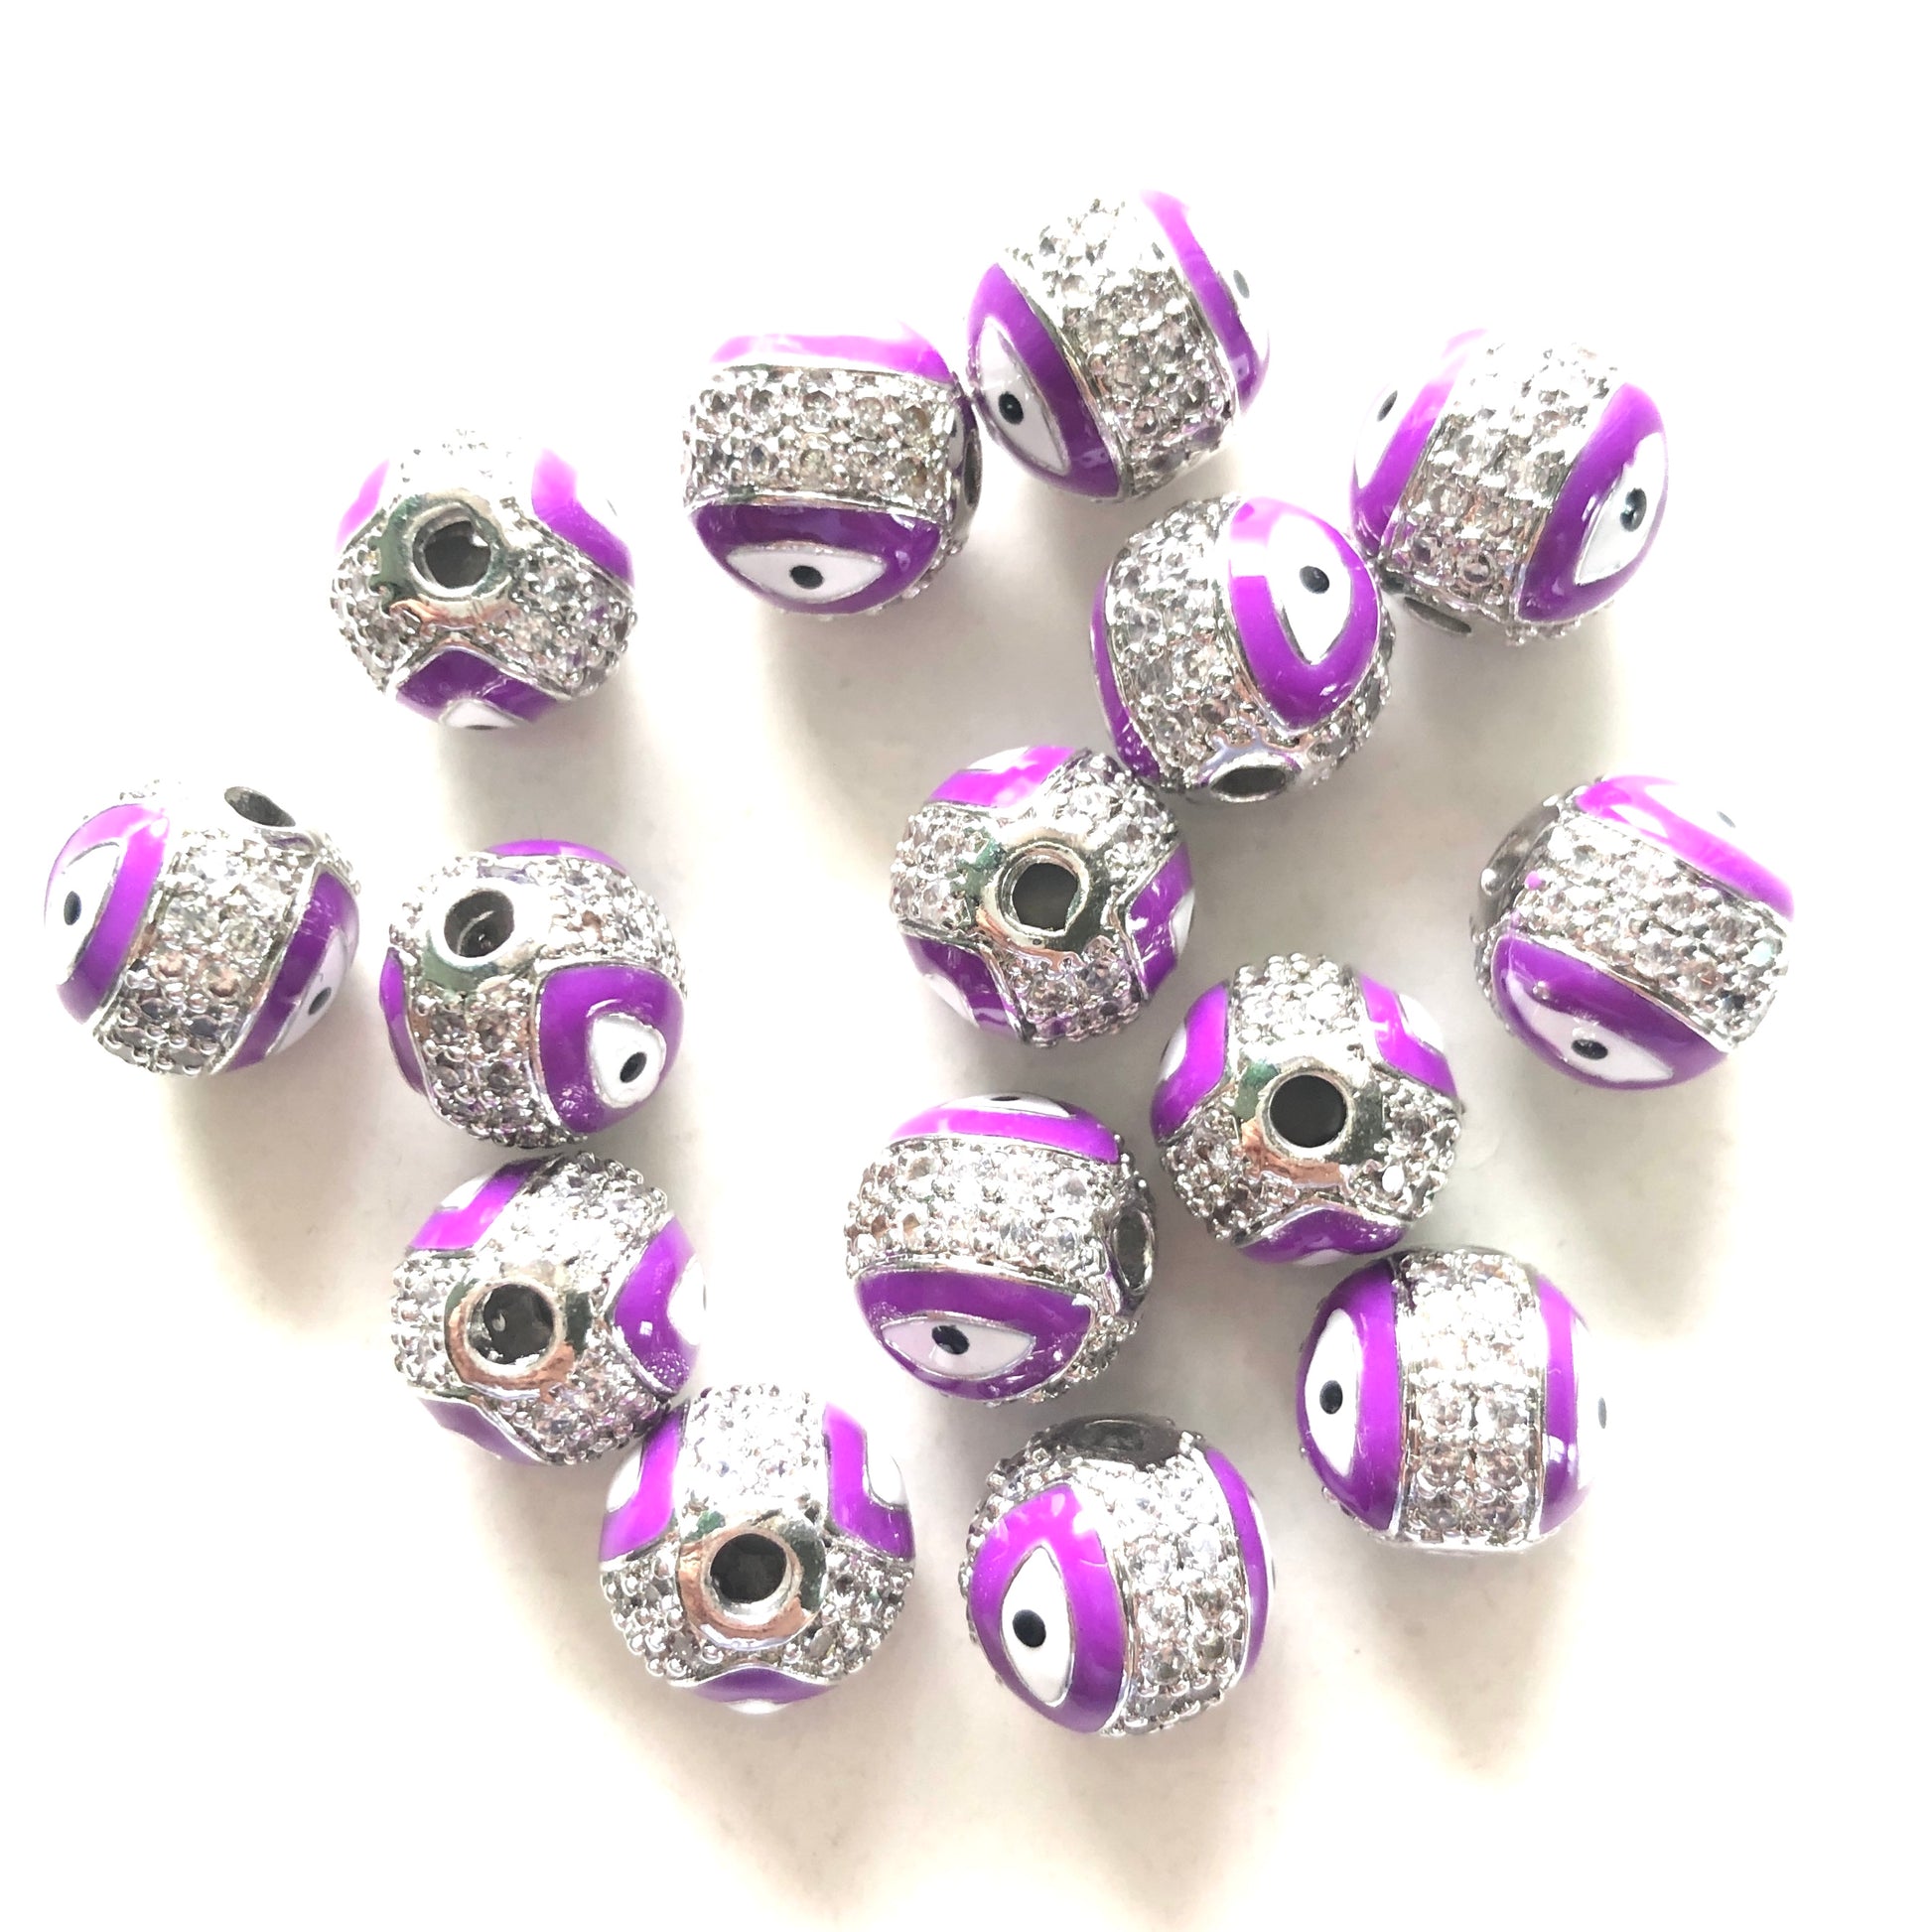 10pcs/lot 10mm CZ Paved Silver Evil Eye Spacers Purple CZ Paved Spacers 10mm Beads Ball Beads New Spacers Arrivals Charms Beads Beyond